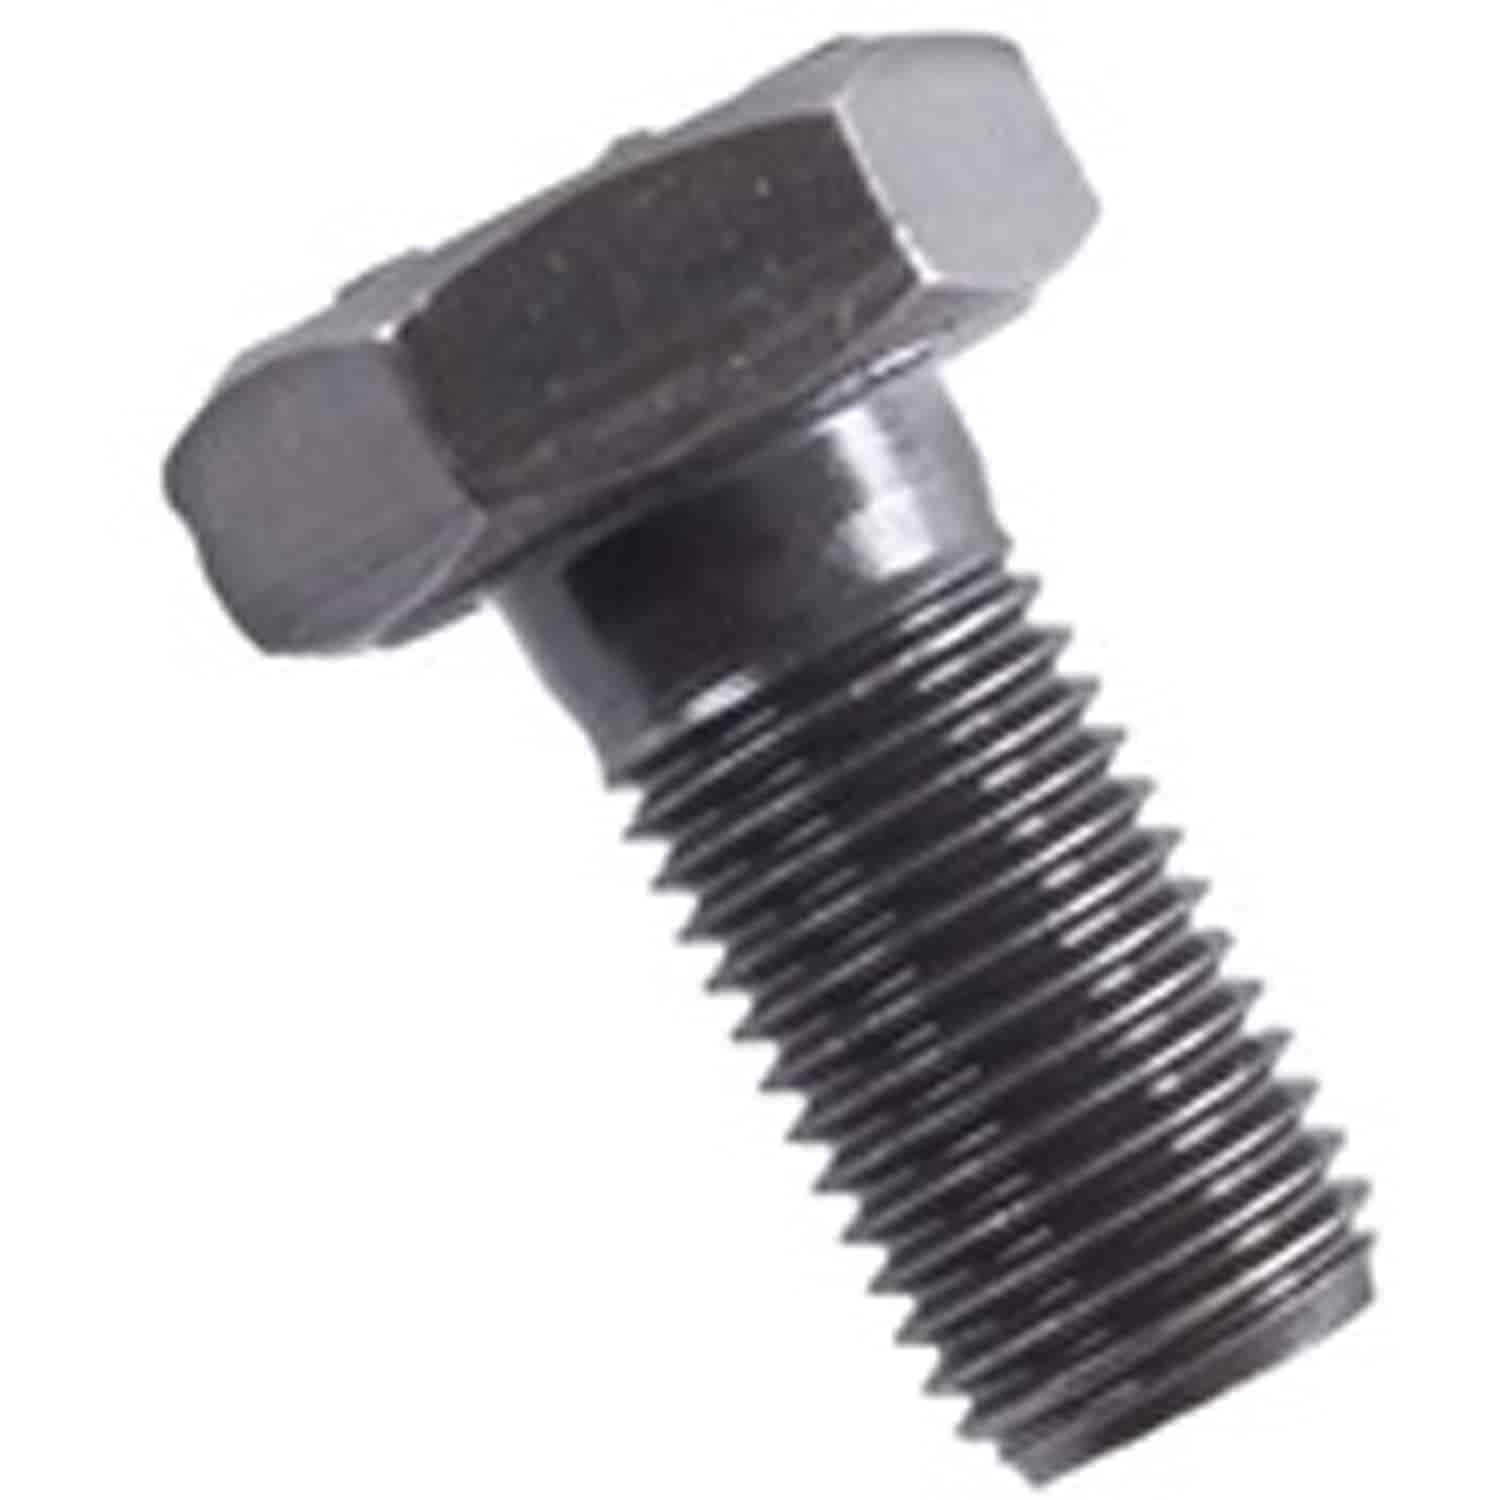 This 7/16 inch ring gear bolt from Omix-ADA for Dana 44 axles. Sold individually. 10 ring bolts required per differential.